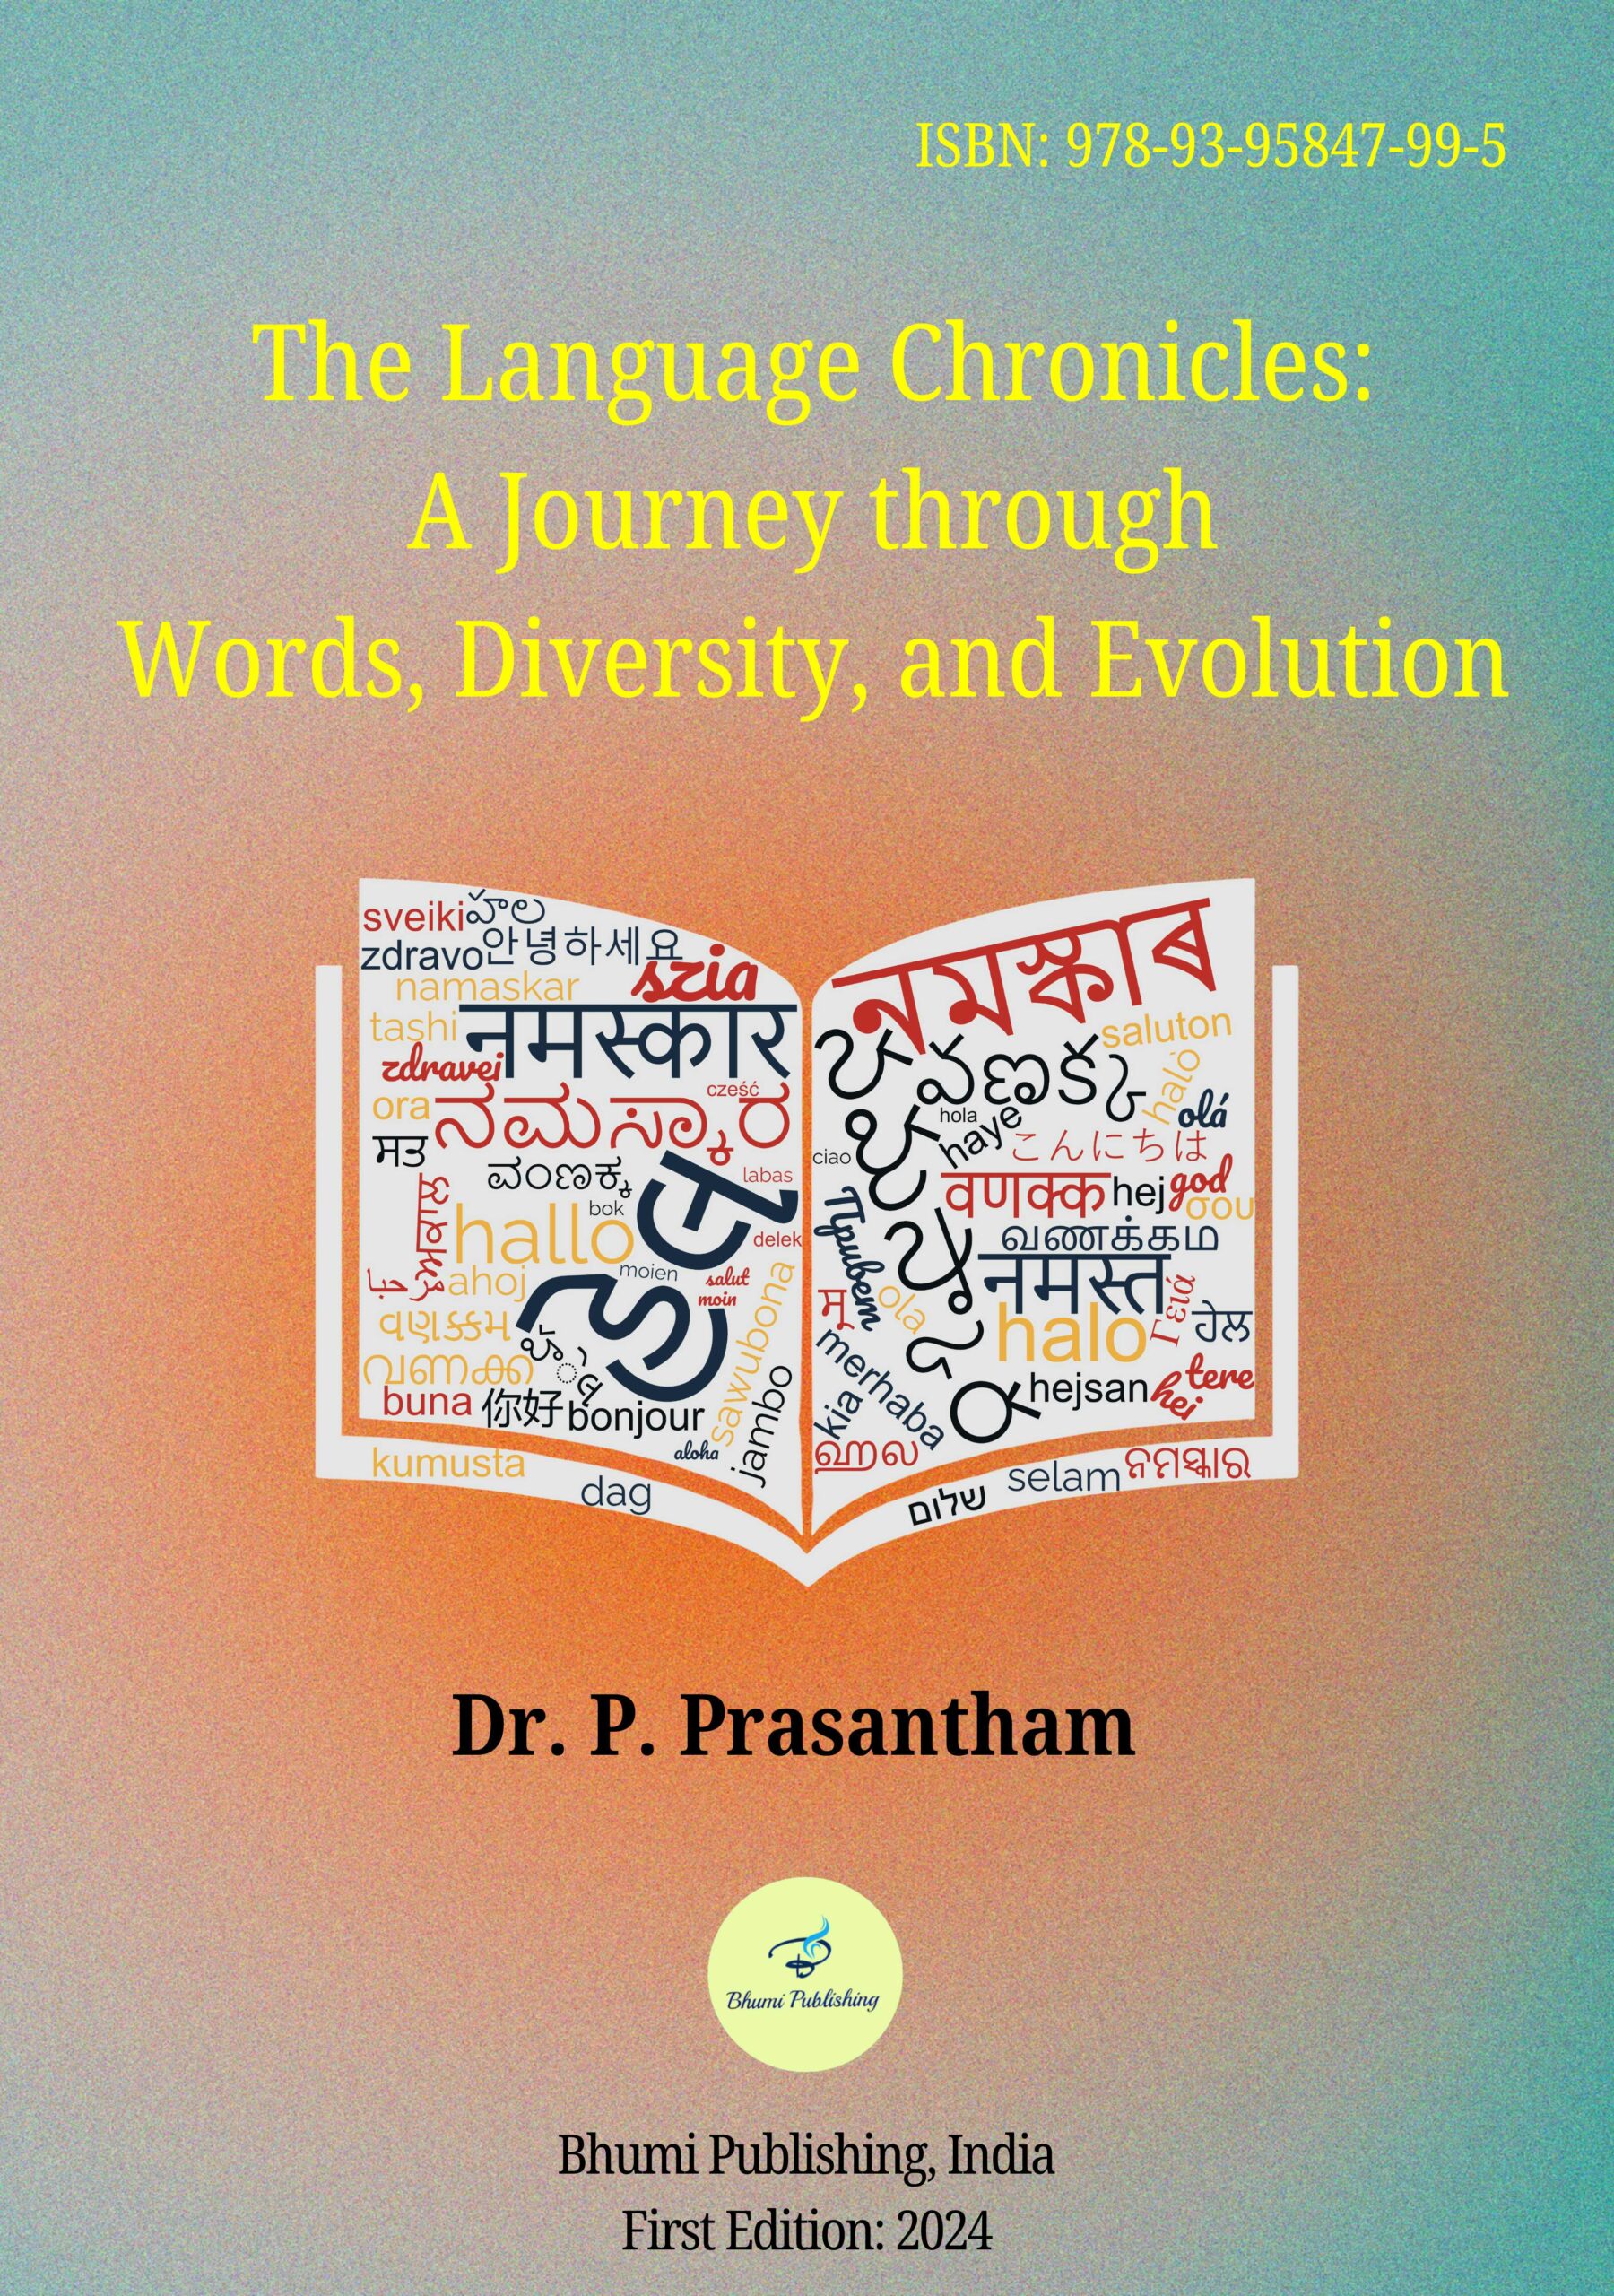 The Language Chronicles: A Journey through Words, Diversity, and Evolution